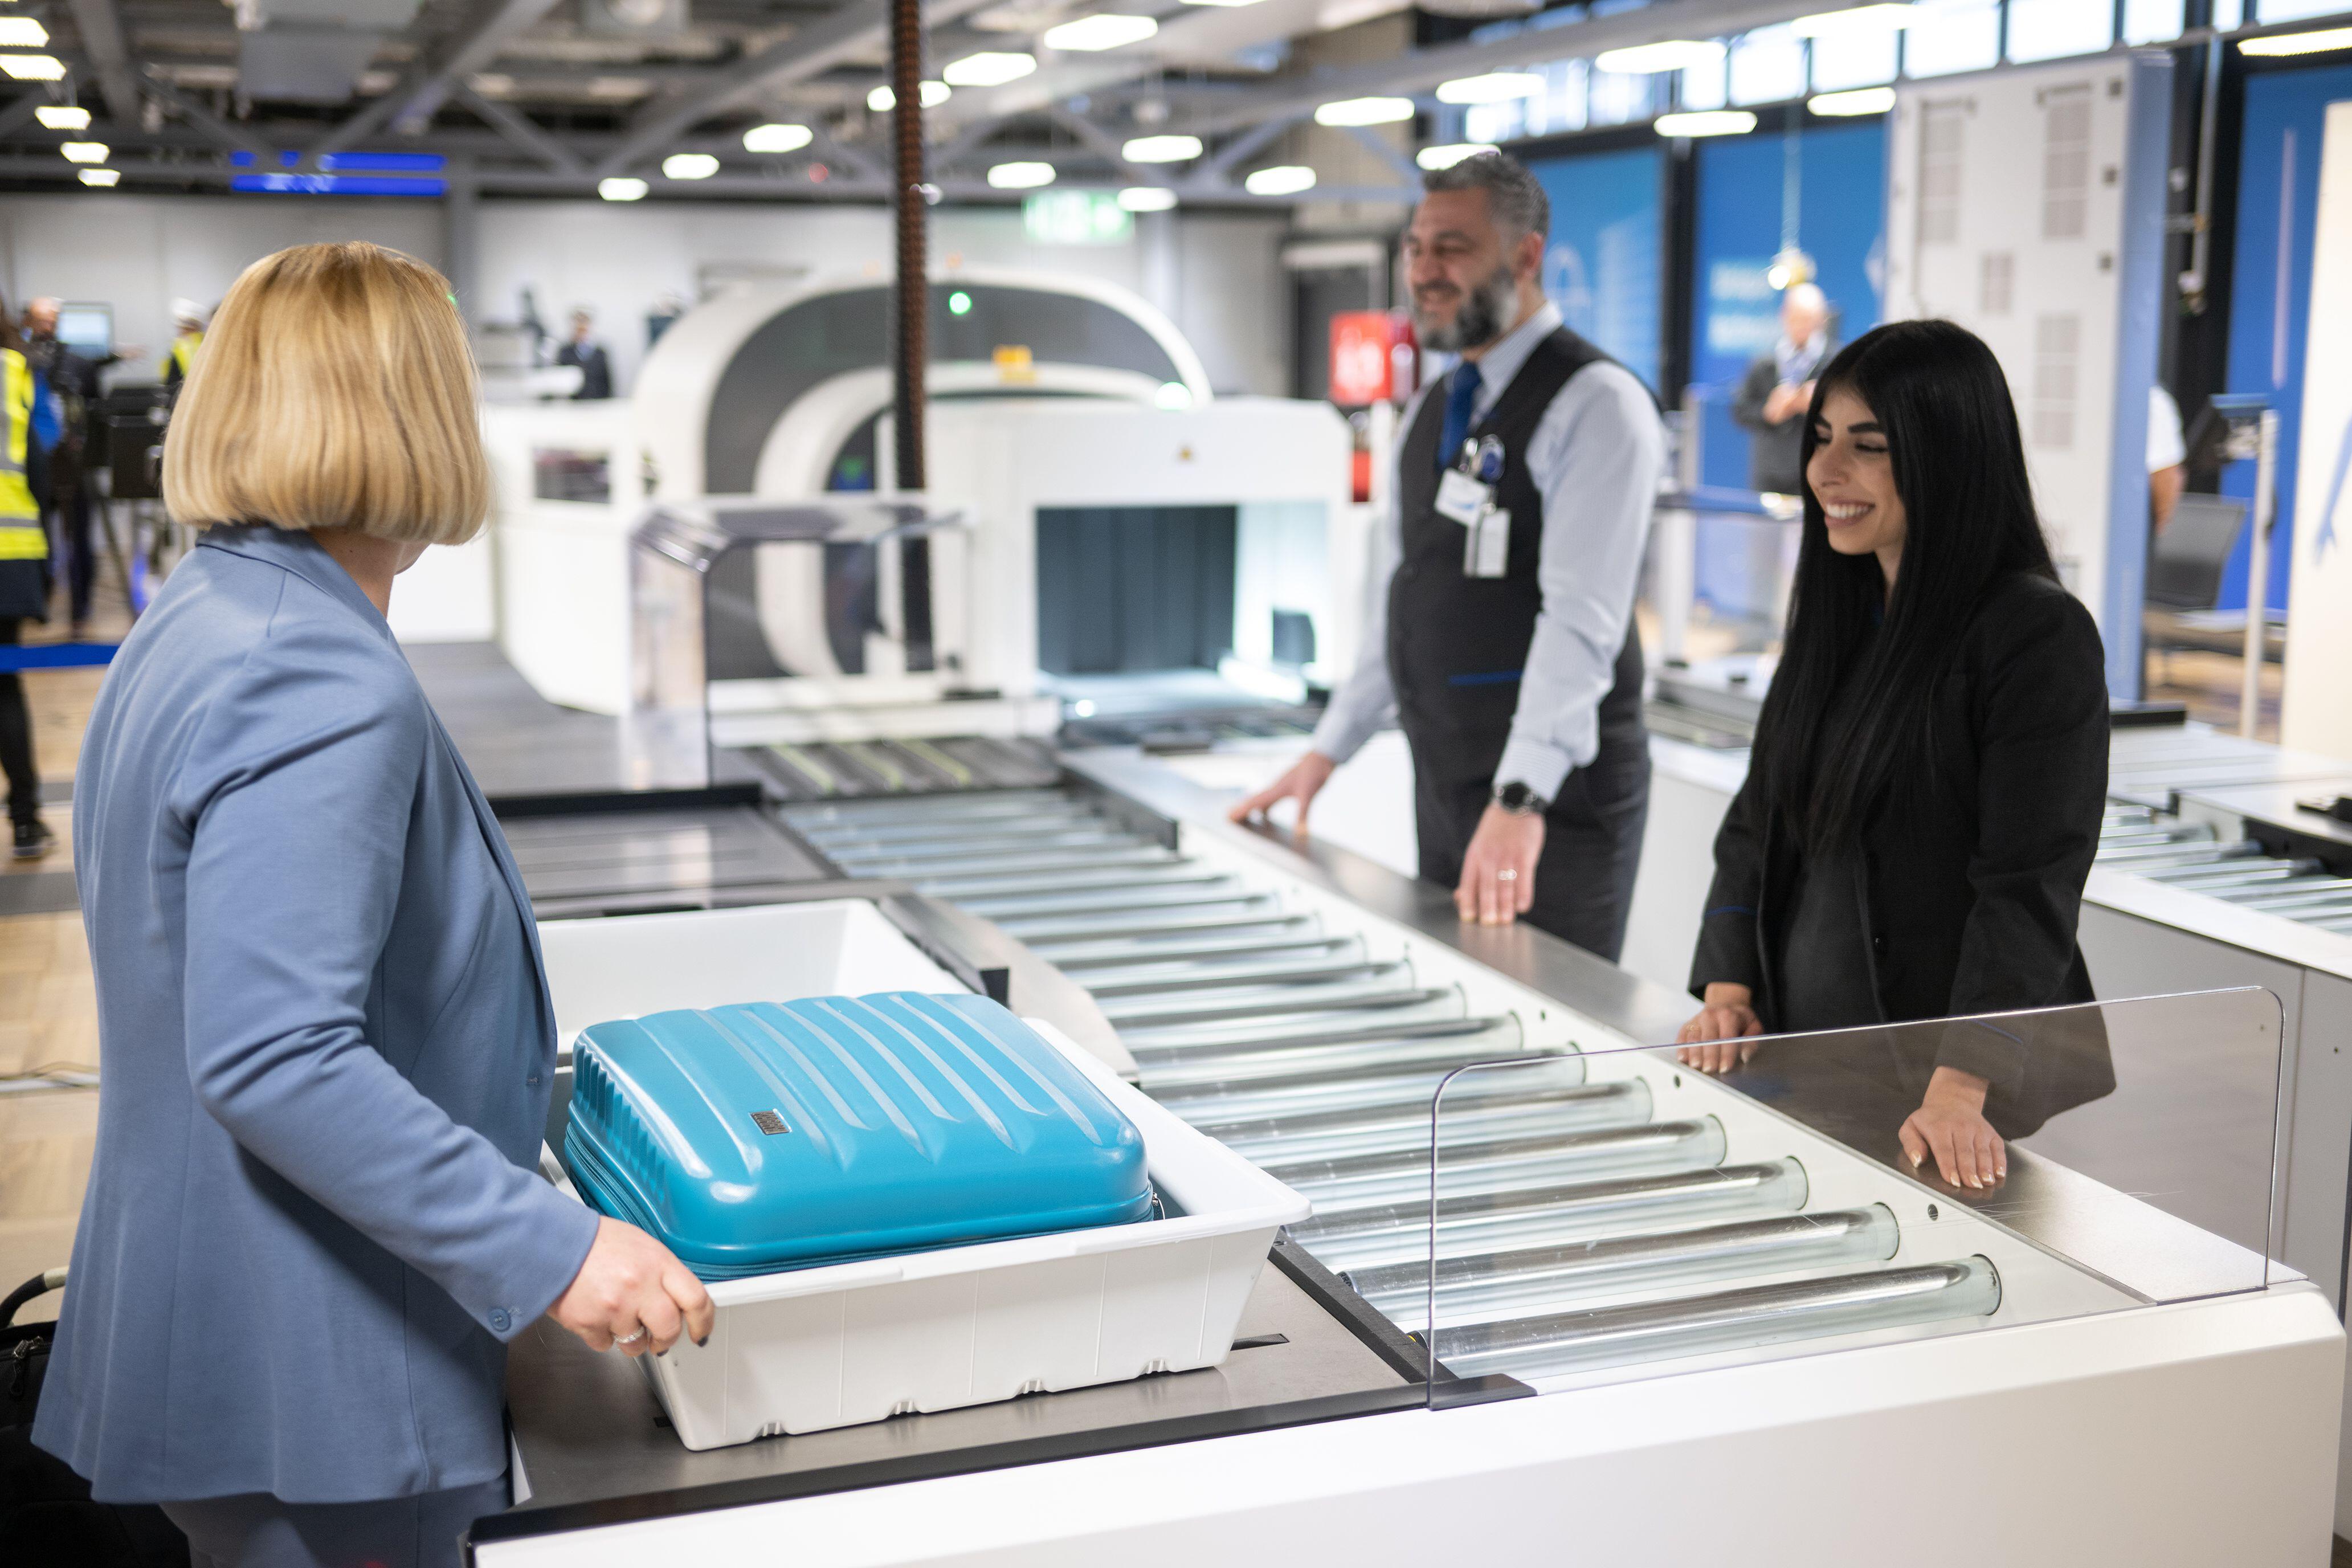 The scanners will be installed at most UK airports by June